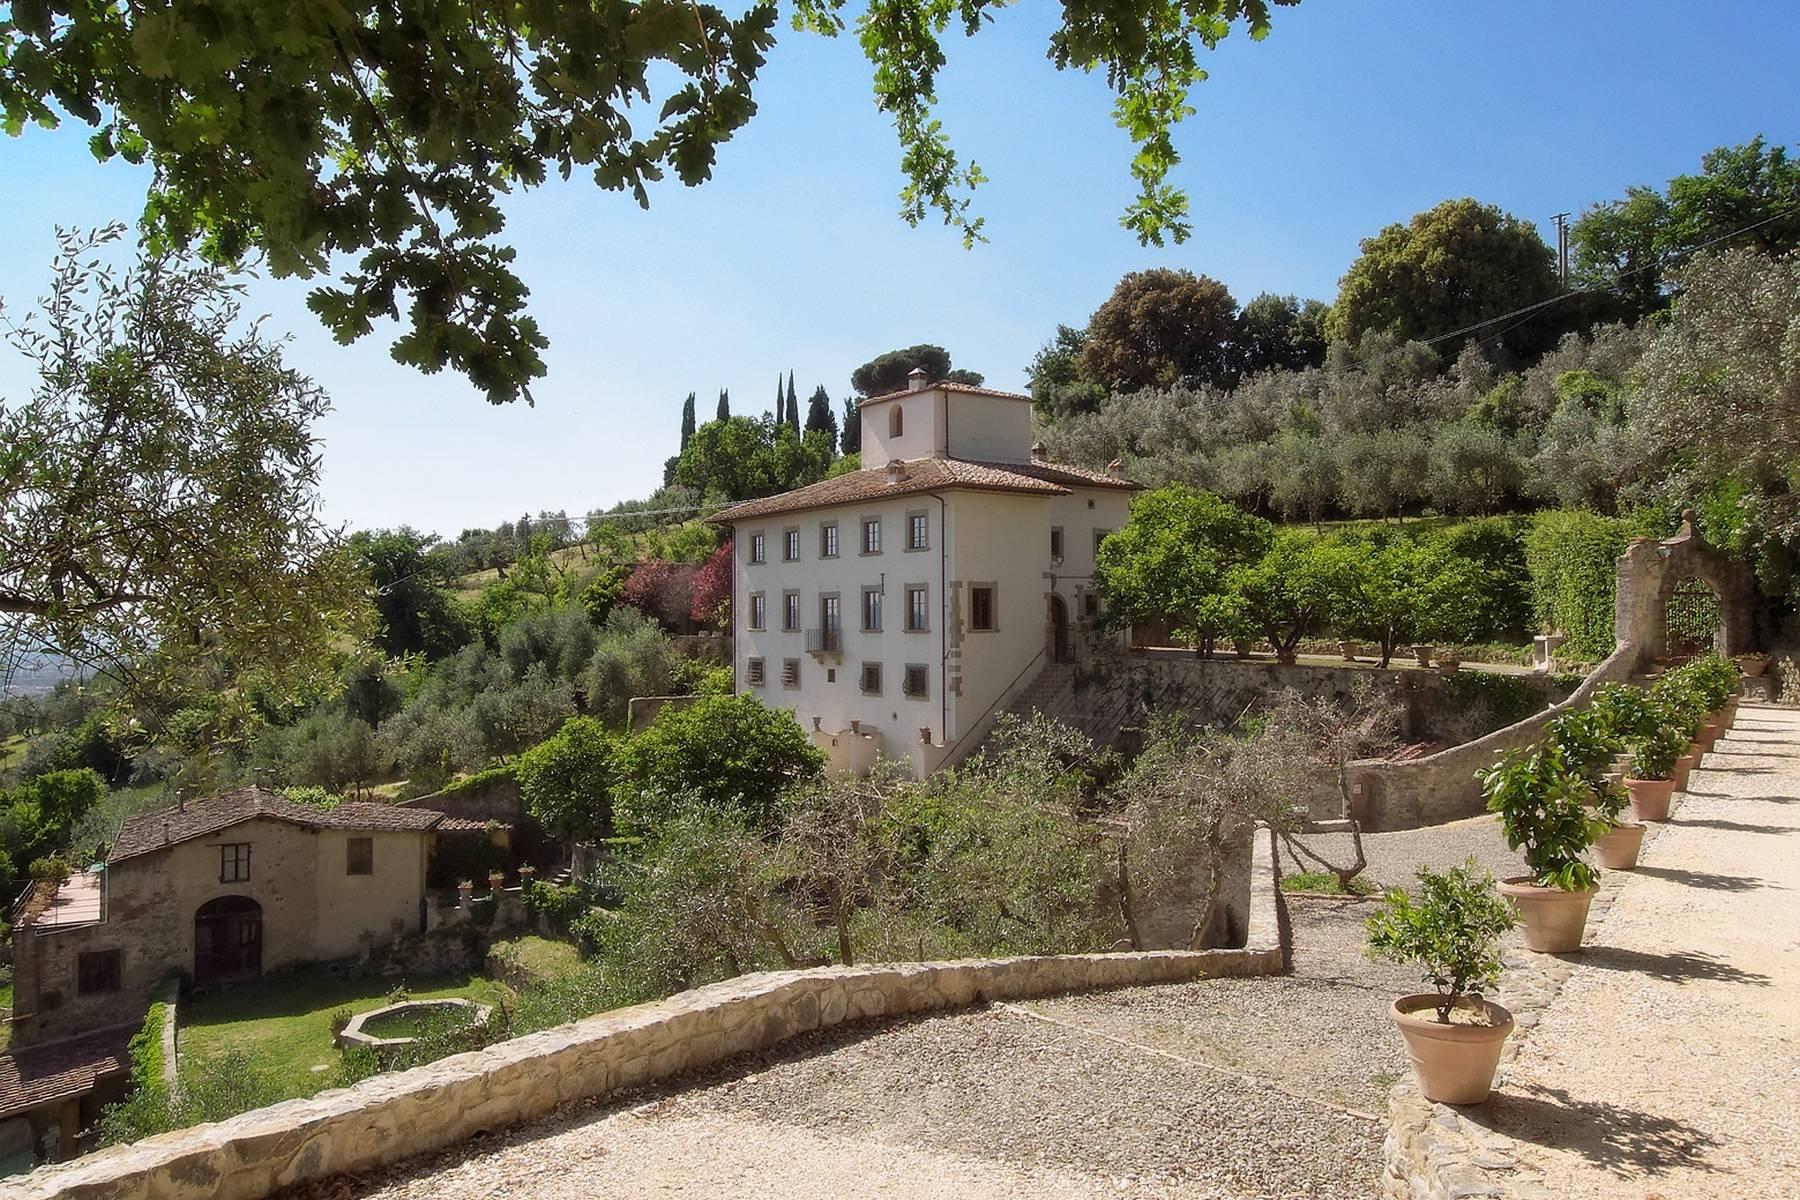 Beautiful 15th century villa with splendid views of Florence and the countryside - 1